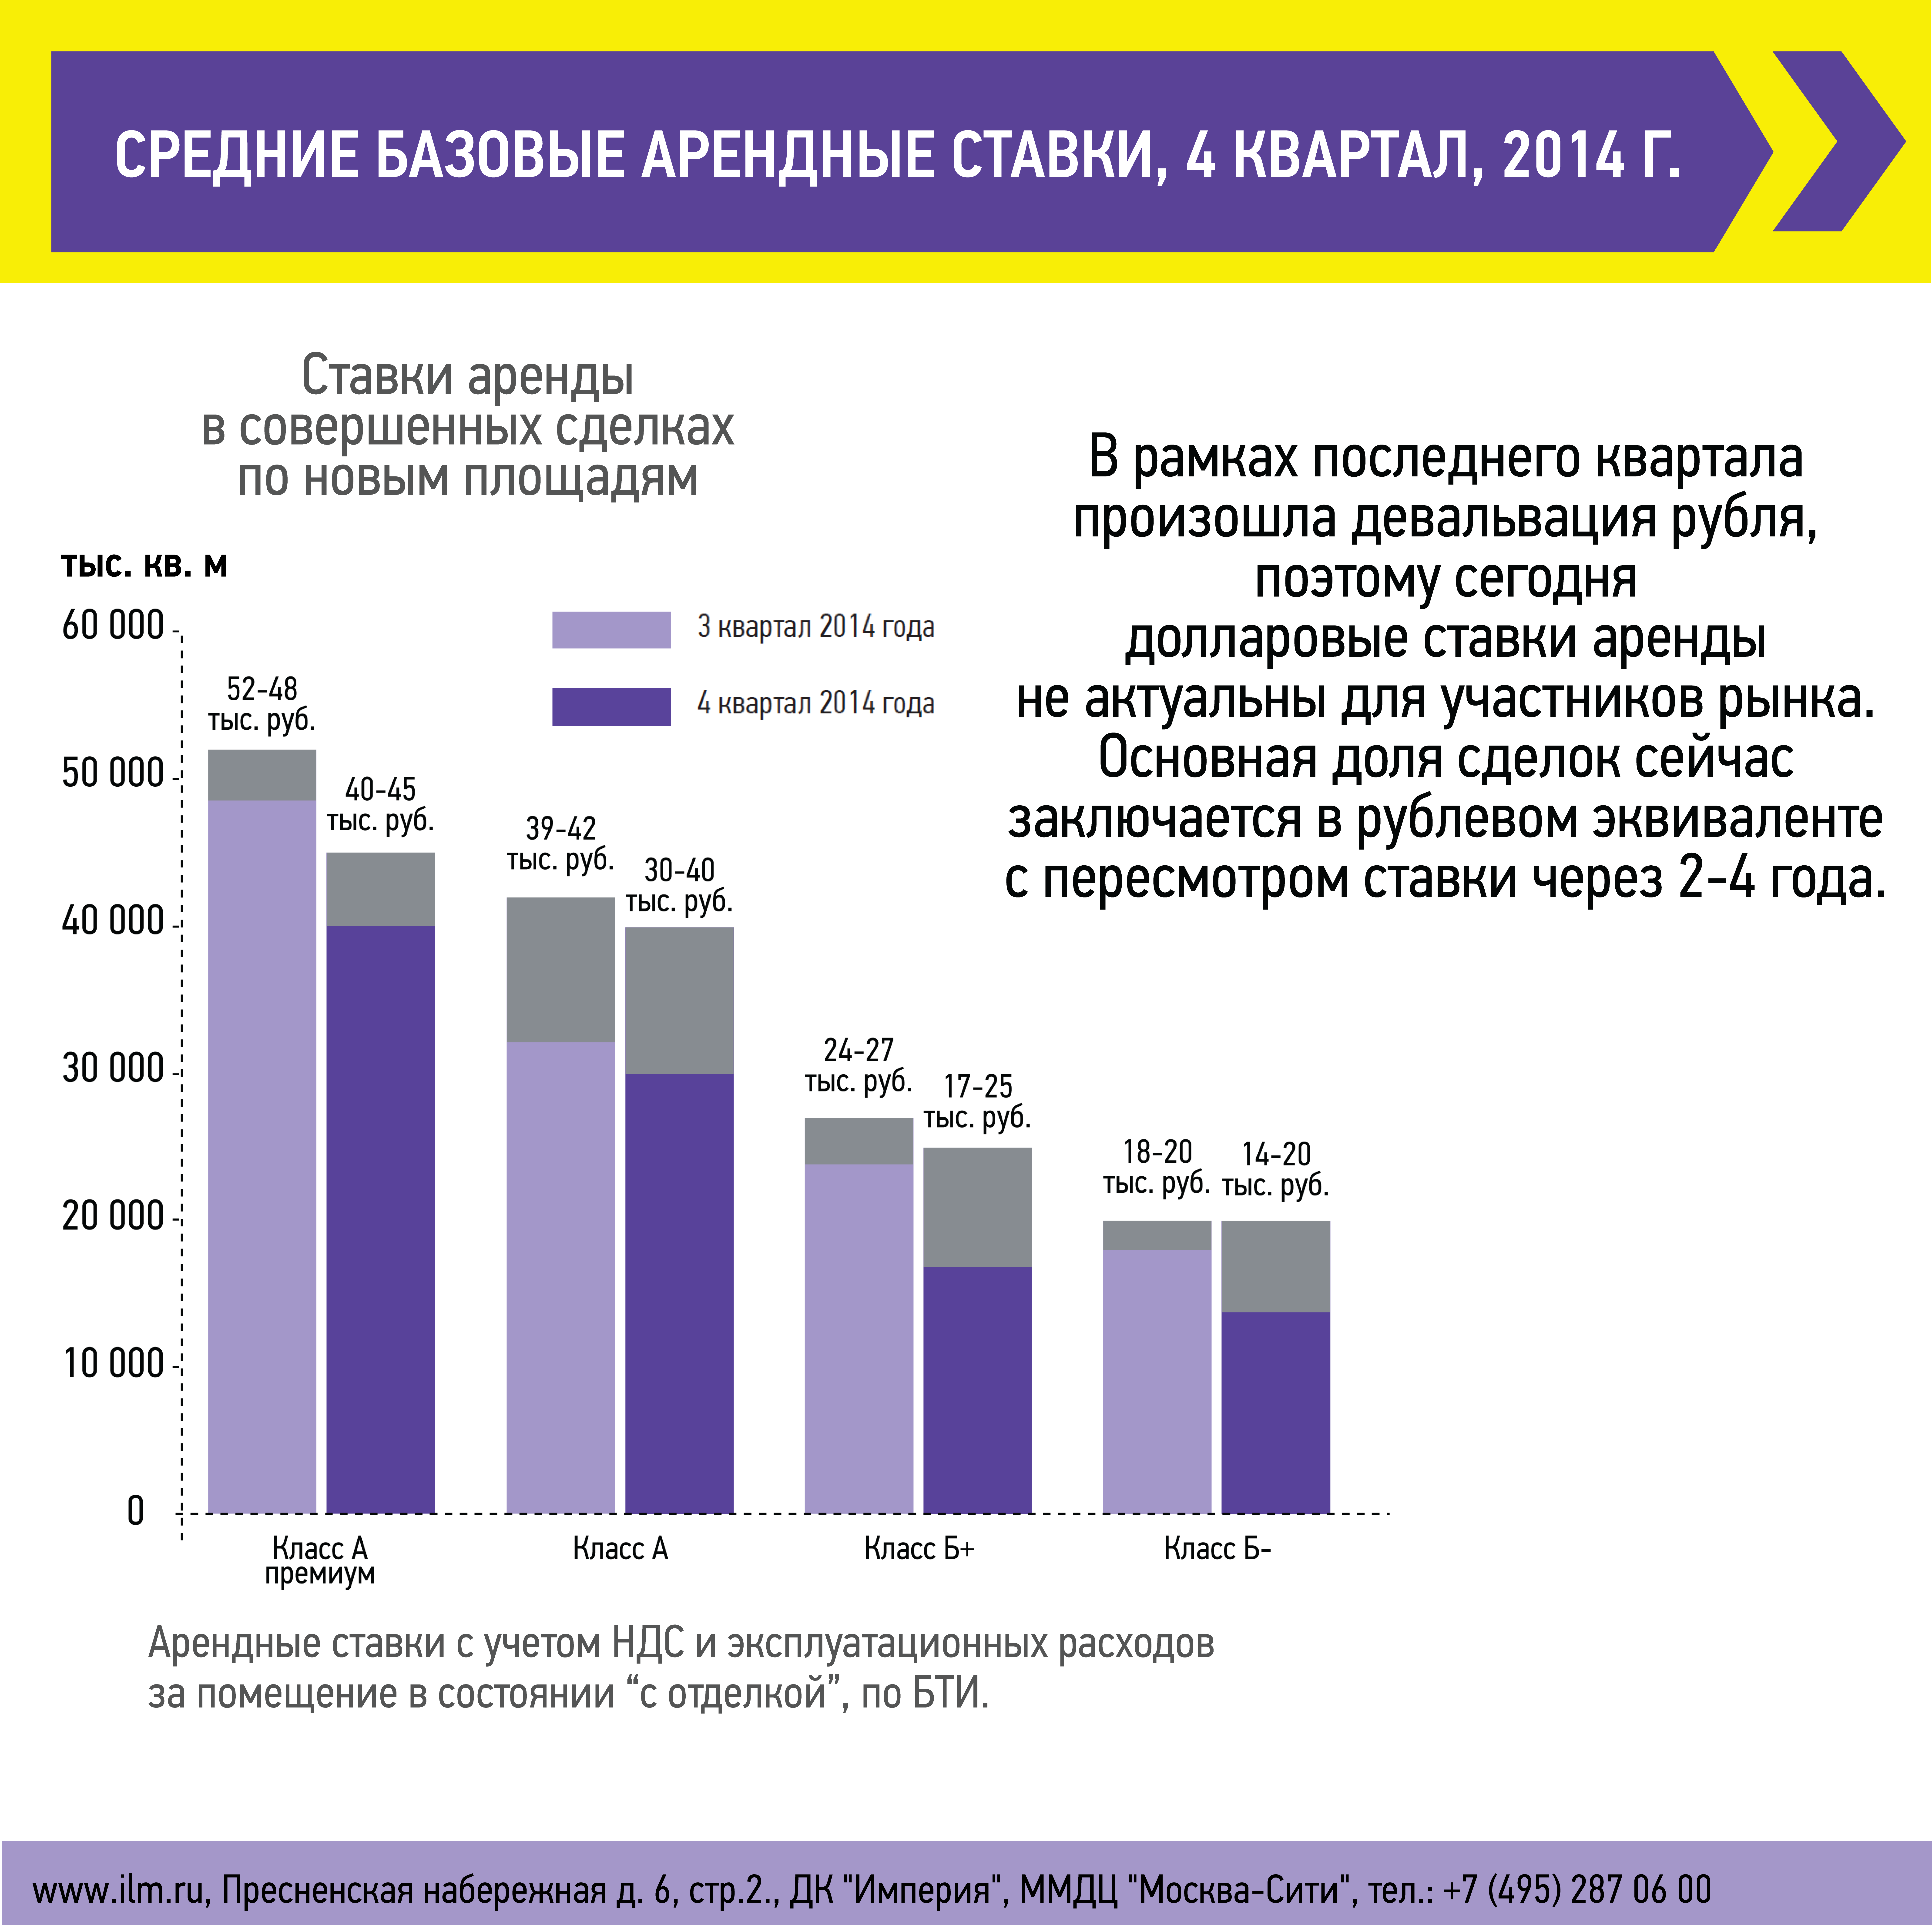 Average asking base rates as of the end of Q4 2014 г.